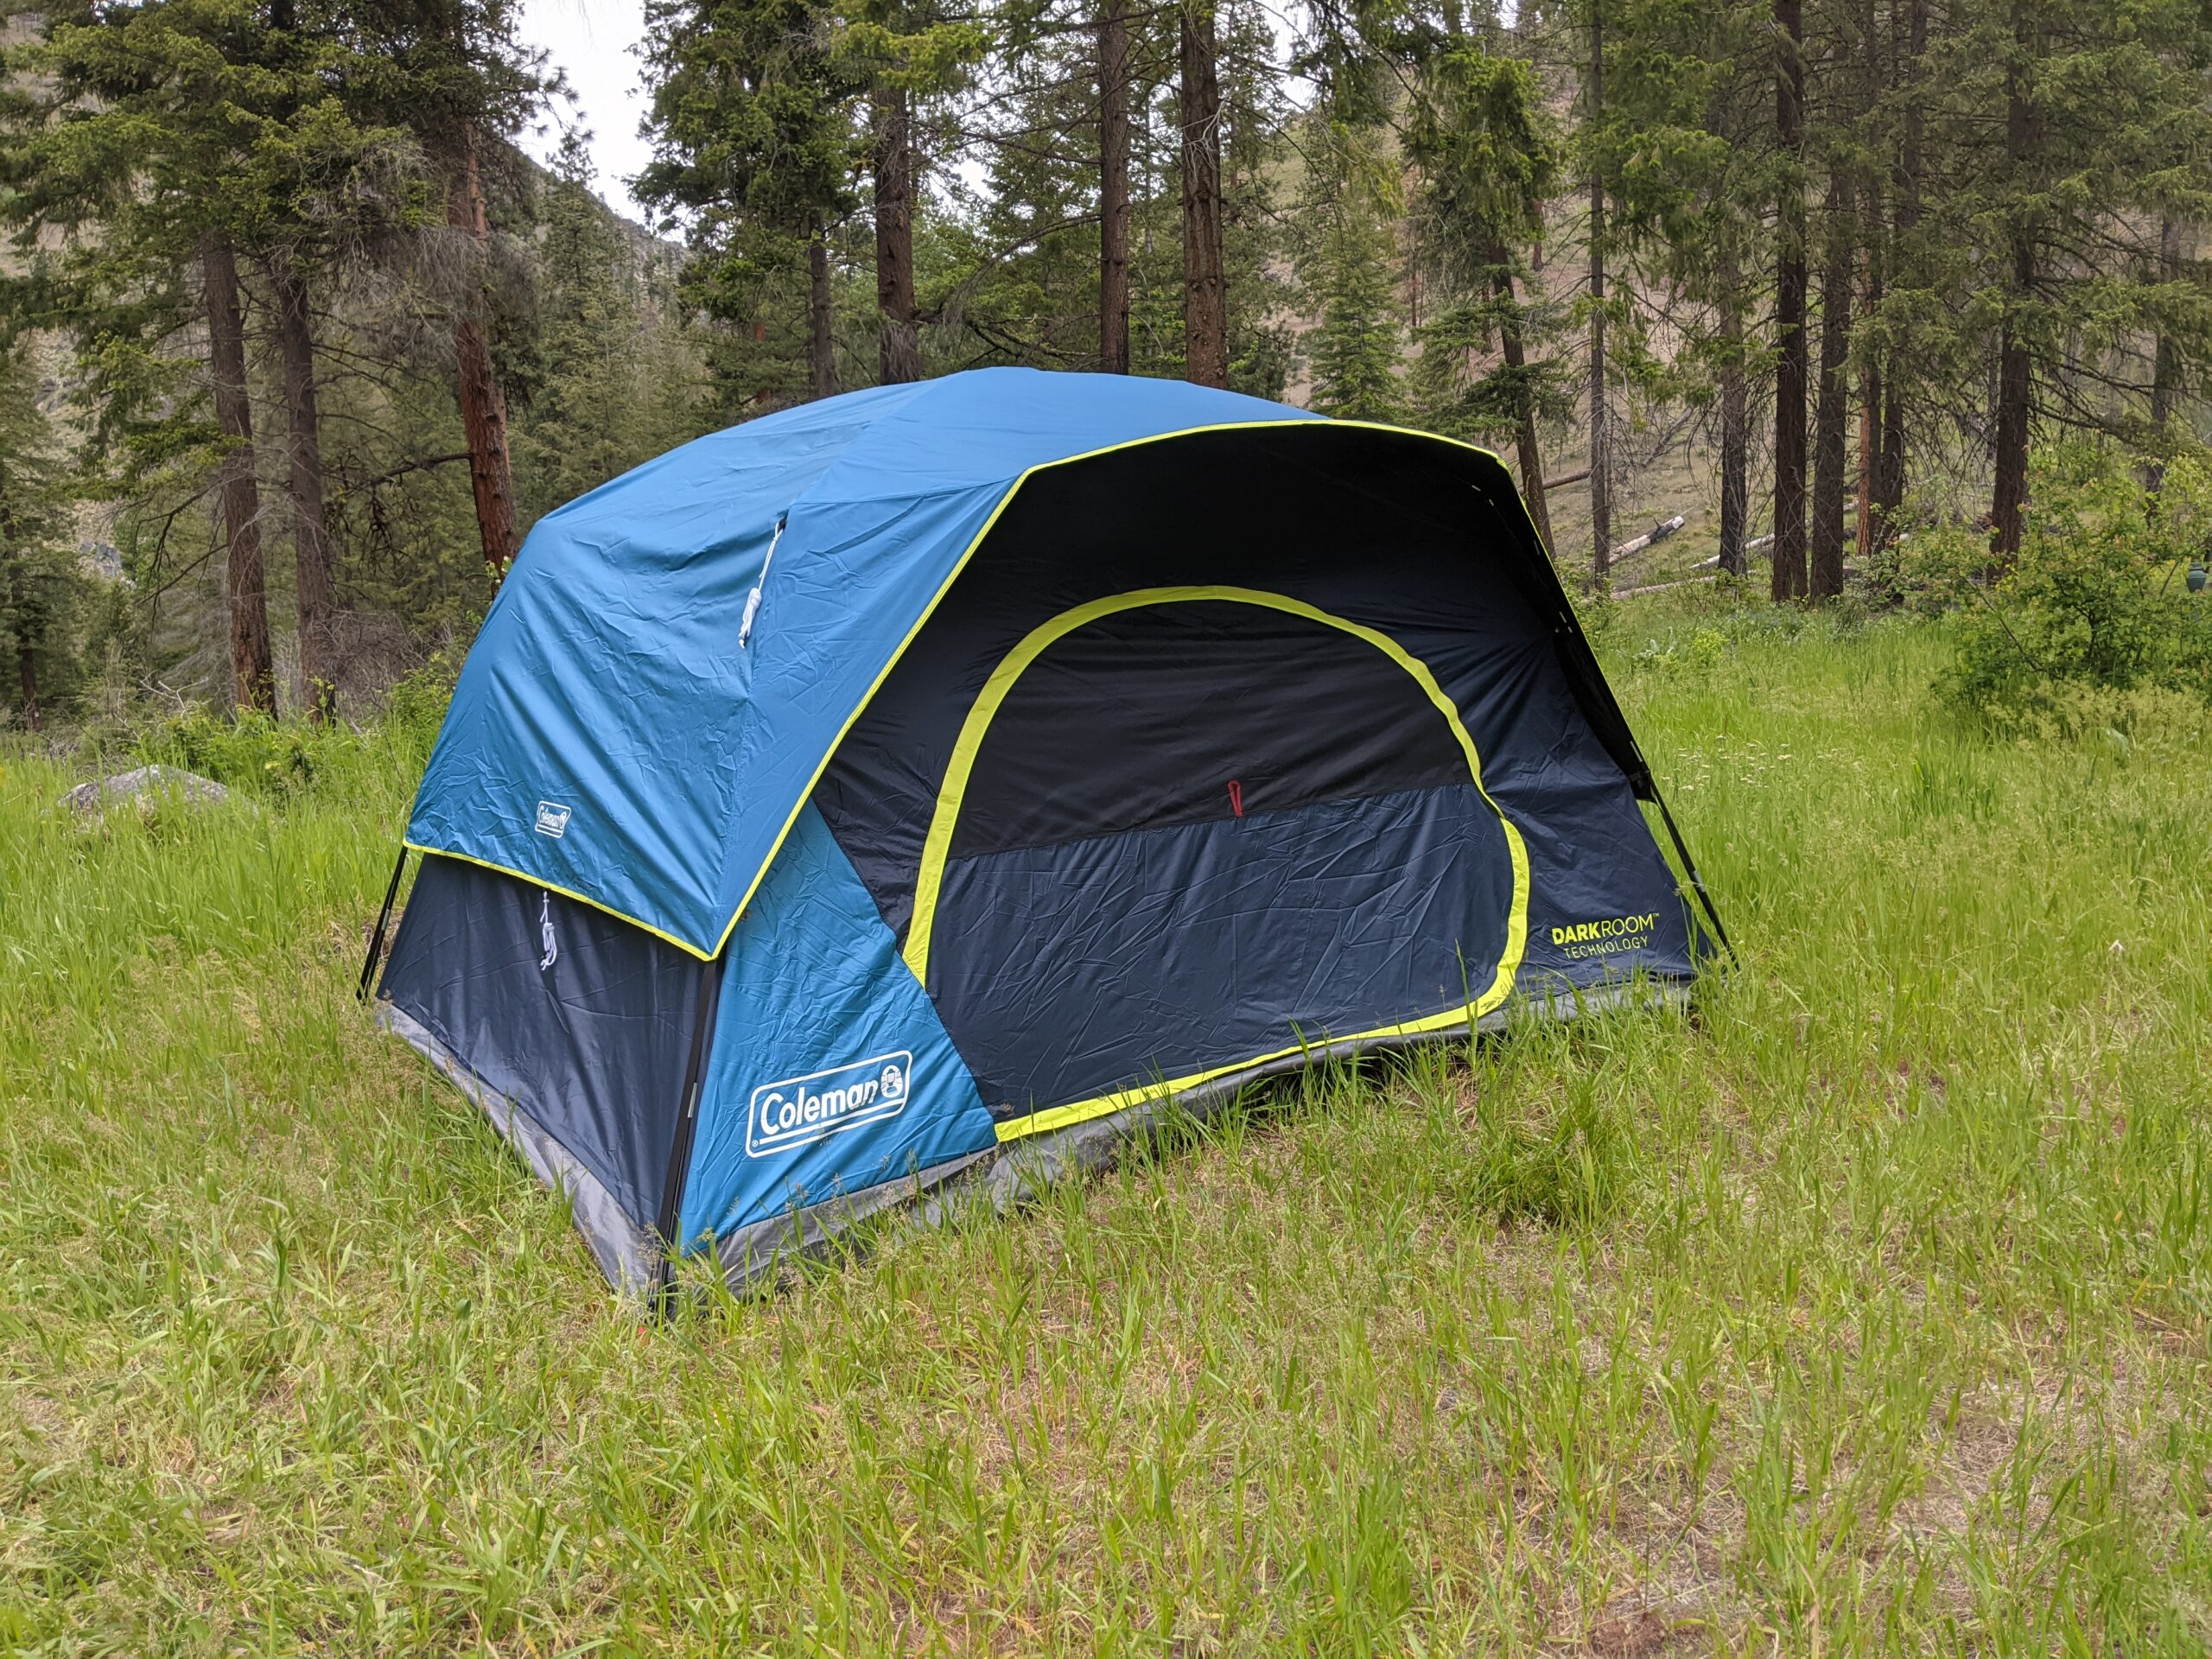 A very serviceable tent that does what it says it will do, even if itâs a little smaller than expected.